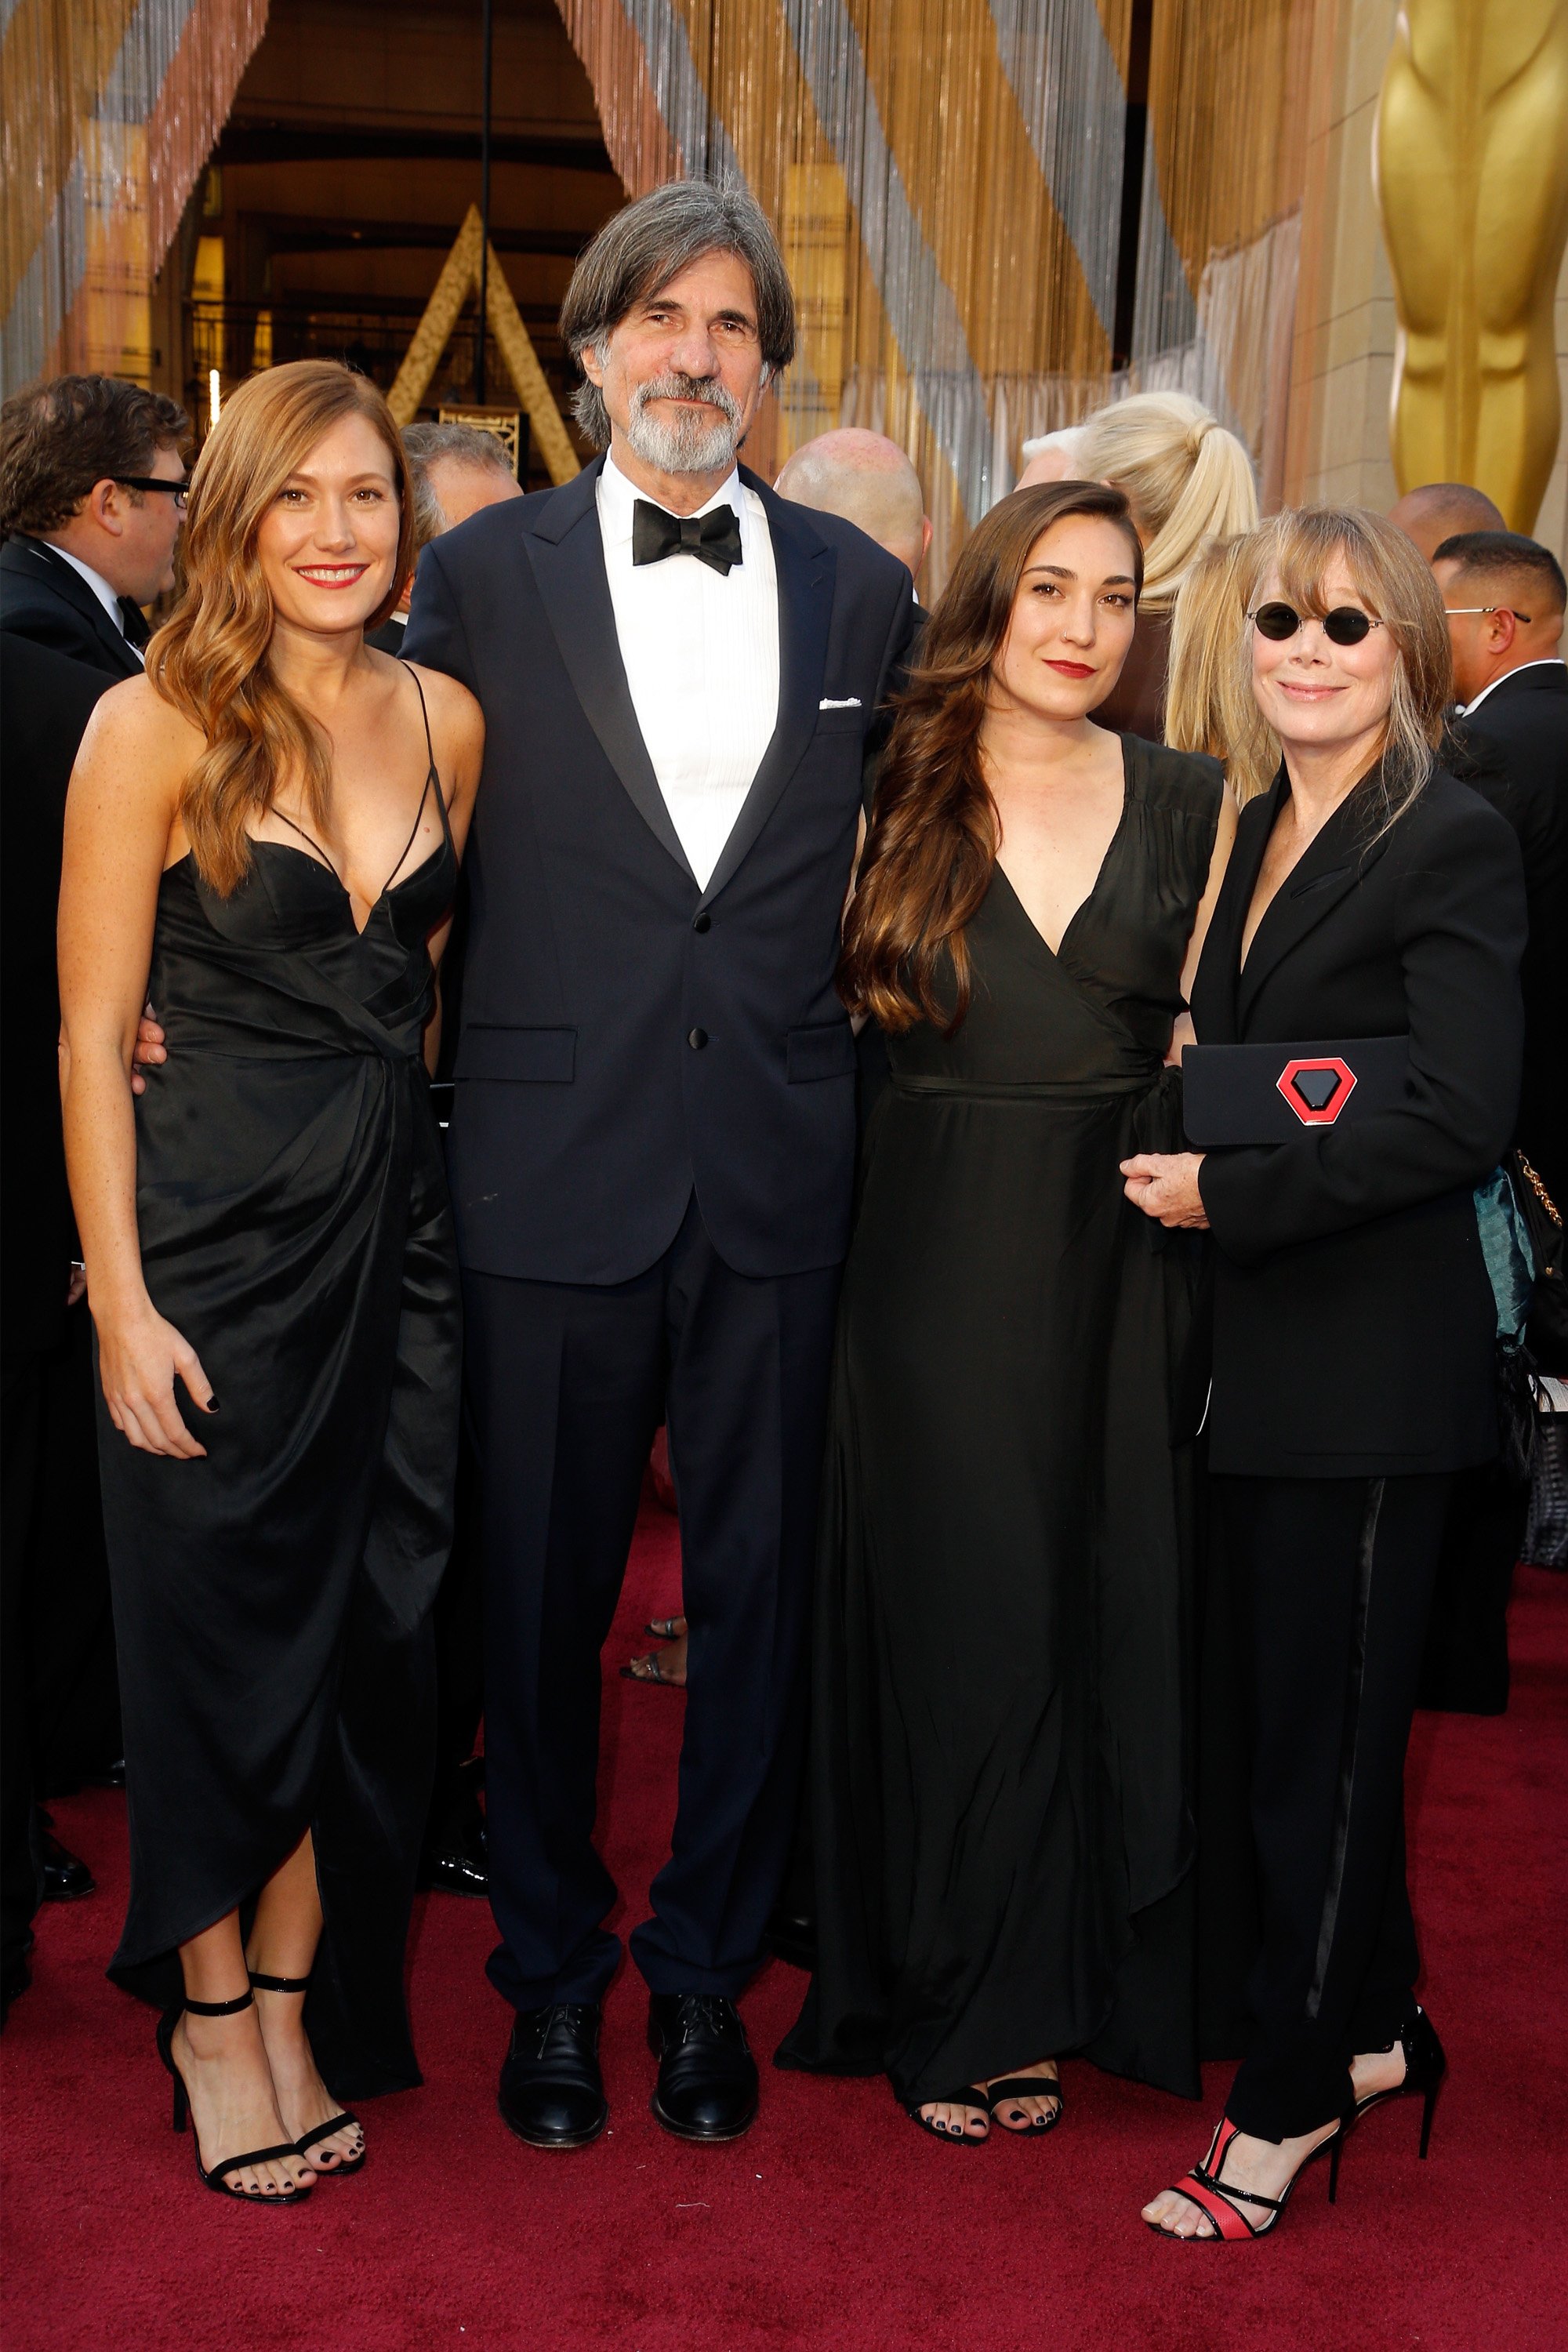 Schuyler Fisk, Jack Fisk, Madison Fisk and Sissy Spacek at the 88th Annual Academy Awards on February 28, 2016 in Hollywood, California |  Source: Getty Images